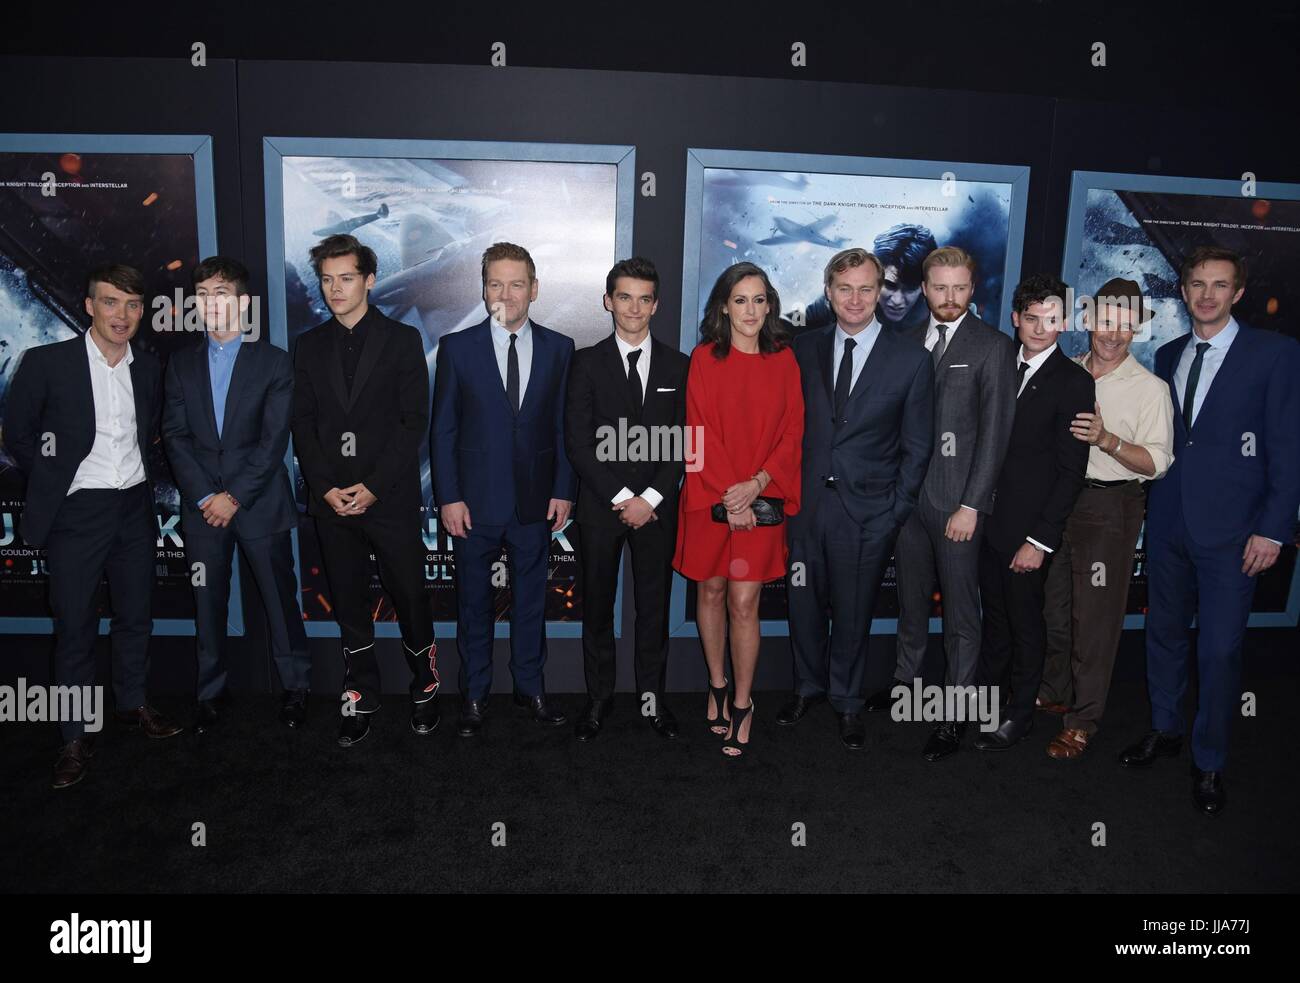 New York, NY, USA. 18 juillet, 2017. Cillian Murphy, Barry Keoghan, Harry Styles, Kenneth Branagh, Fionn Whitehead, Emma Thomas, Christpher Nolan, Jack Lowden, Aneurin Barnard, Mark Rylance, James D'Arcy au niveau des arrivées pour Dunkerque Premiere, AMC Loews Lincoln Square 13, New York, NY 18 juillet 2017. Credit : Derek Storm/Everett Collection/Alamy Live News Banque D'Images